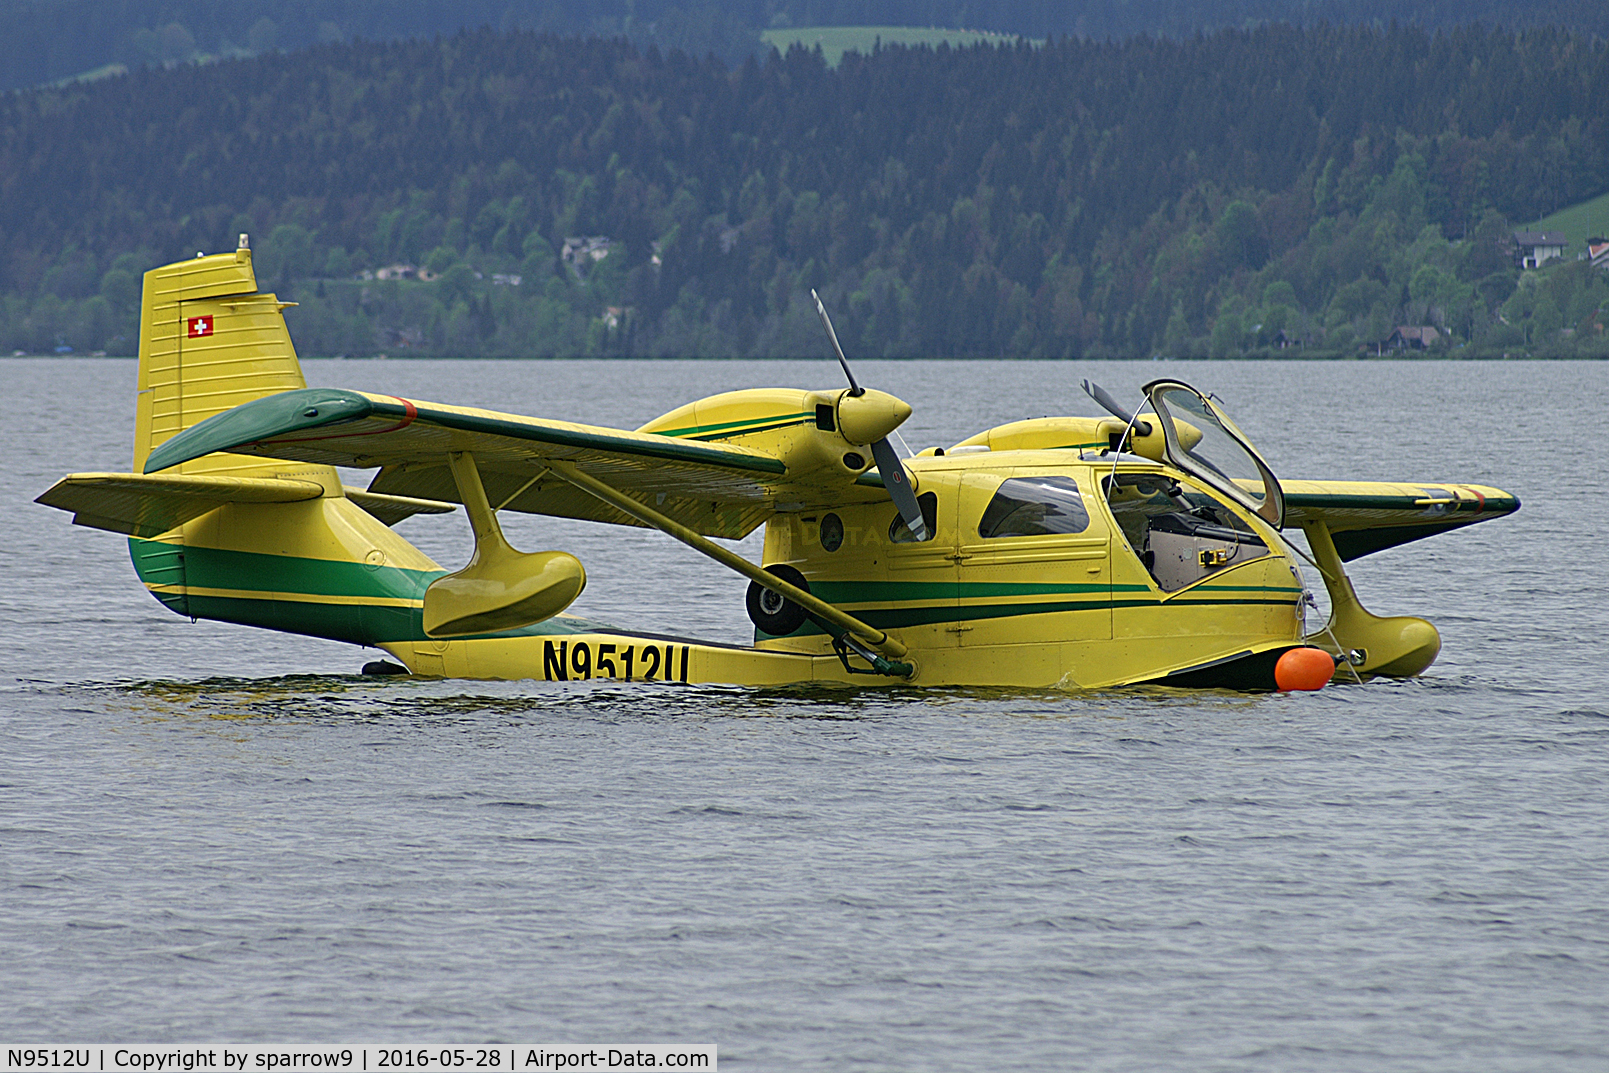 N9512U, 1976 STOL Aircraft UC-1 Twin Bee C/N 018, Former HB-LSK, again with its former registration since 2016-04-21, on the Lac de Joux near L'Abbaye in the Swiss Jura-mountains.